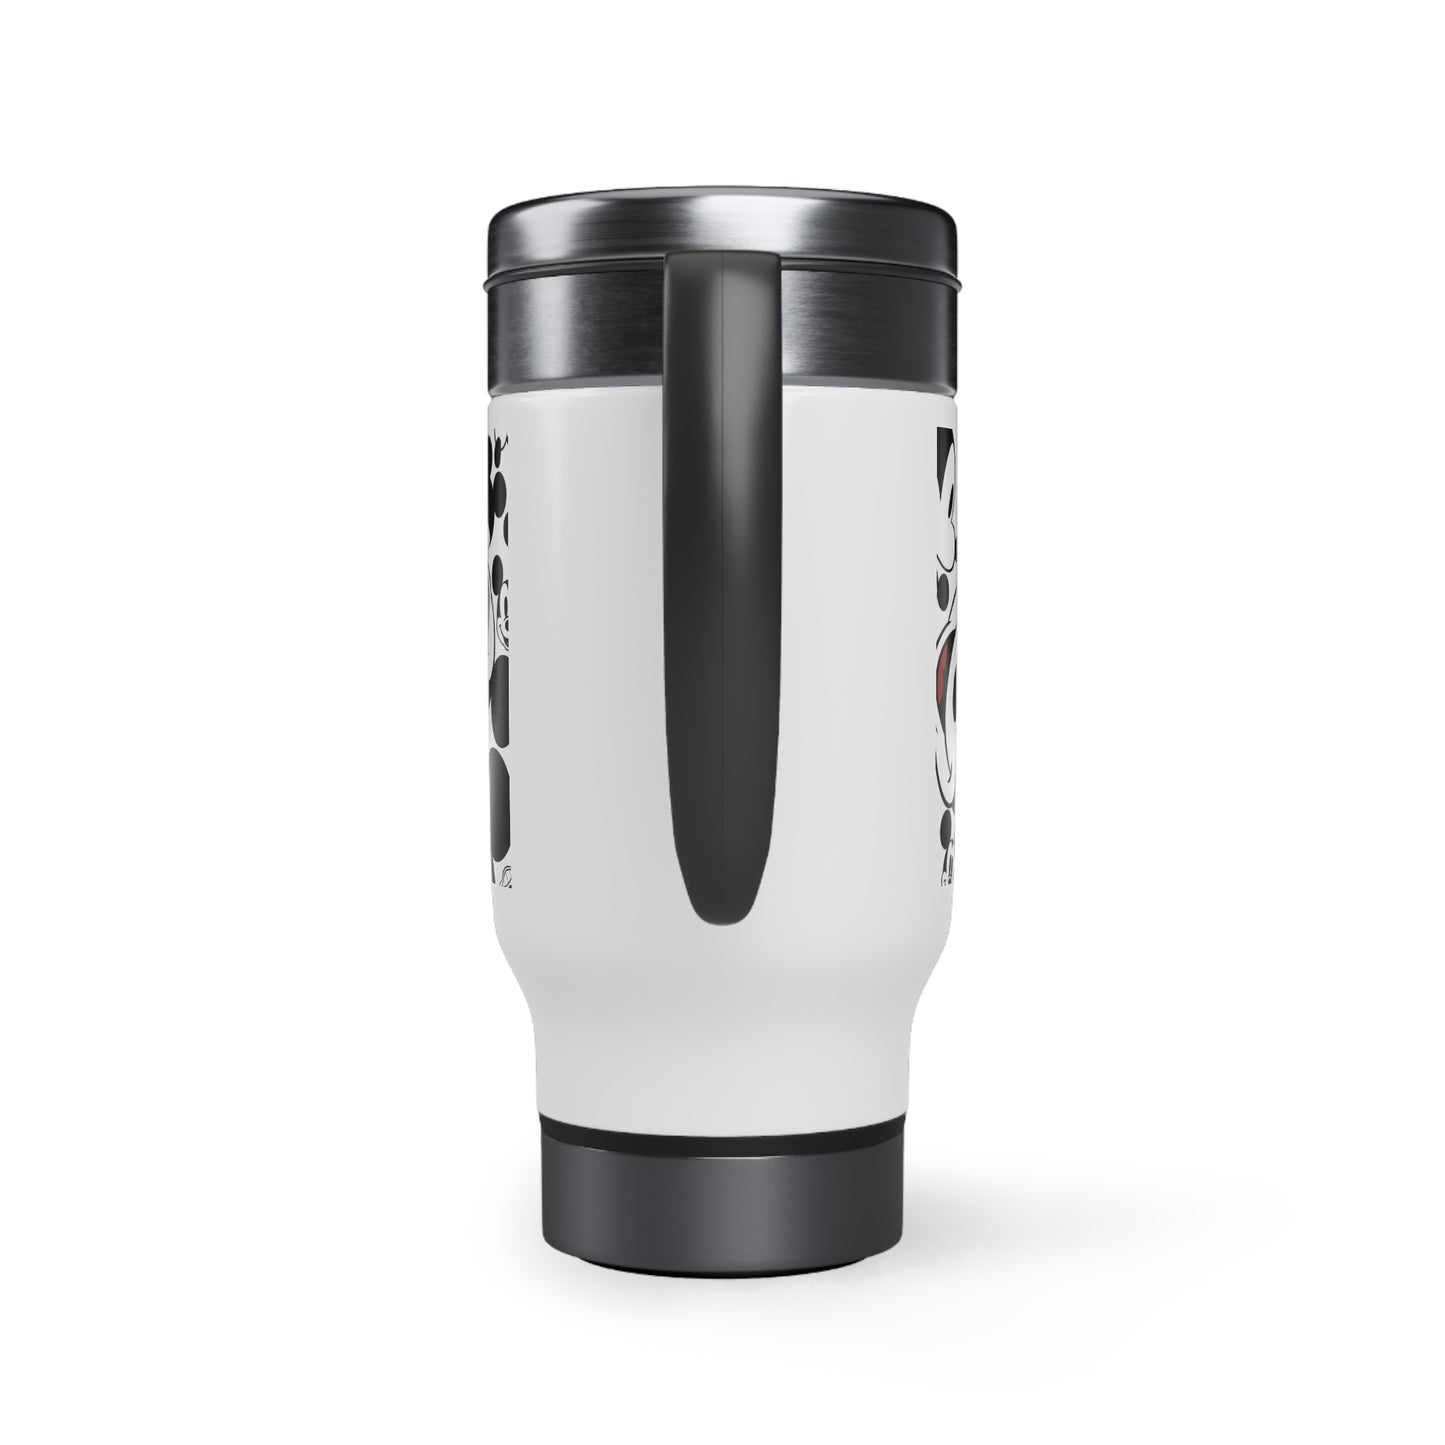 MICKEY Stainless Steel Travel Mug with Handle, 14oz